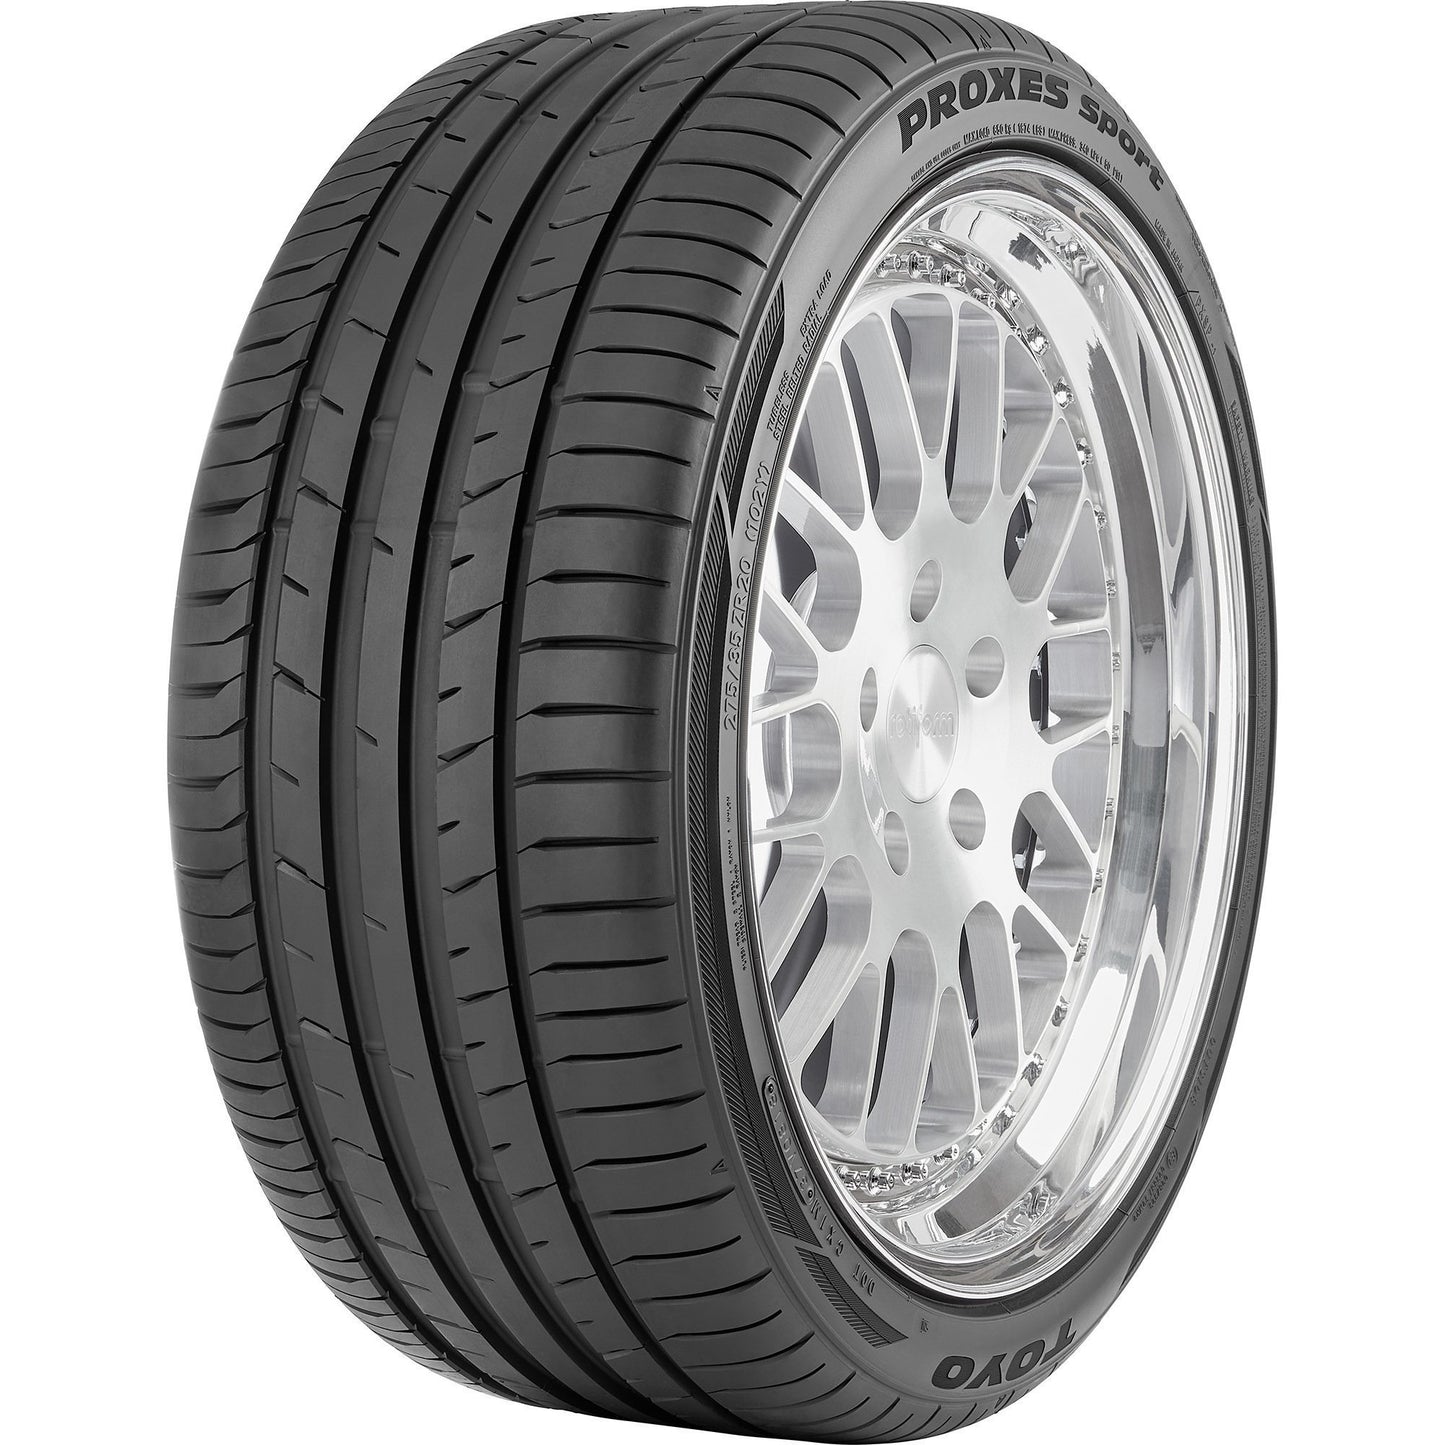 Toyo 285/35R19 99Y Proxes Sport Tire - Universal (133160)-toy133160-133160-Tires-Toyo-285-35-19-JDMuscle